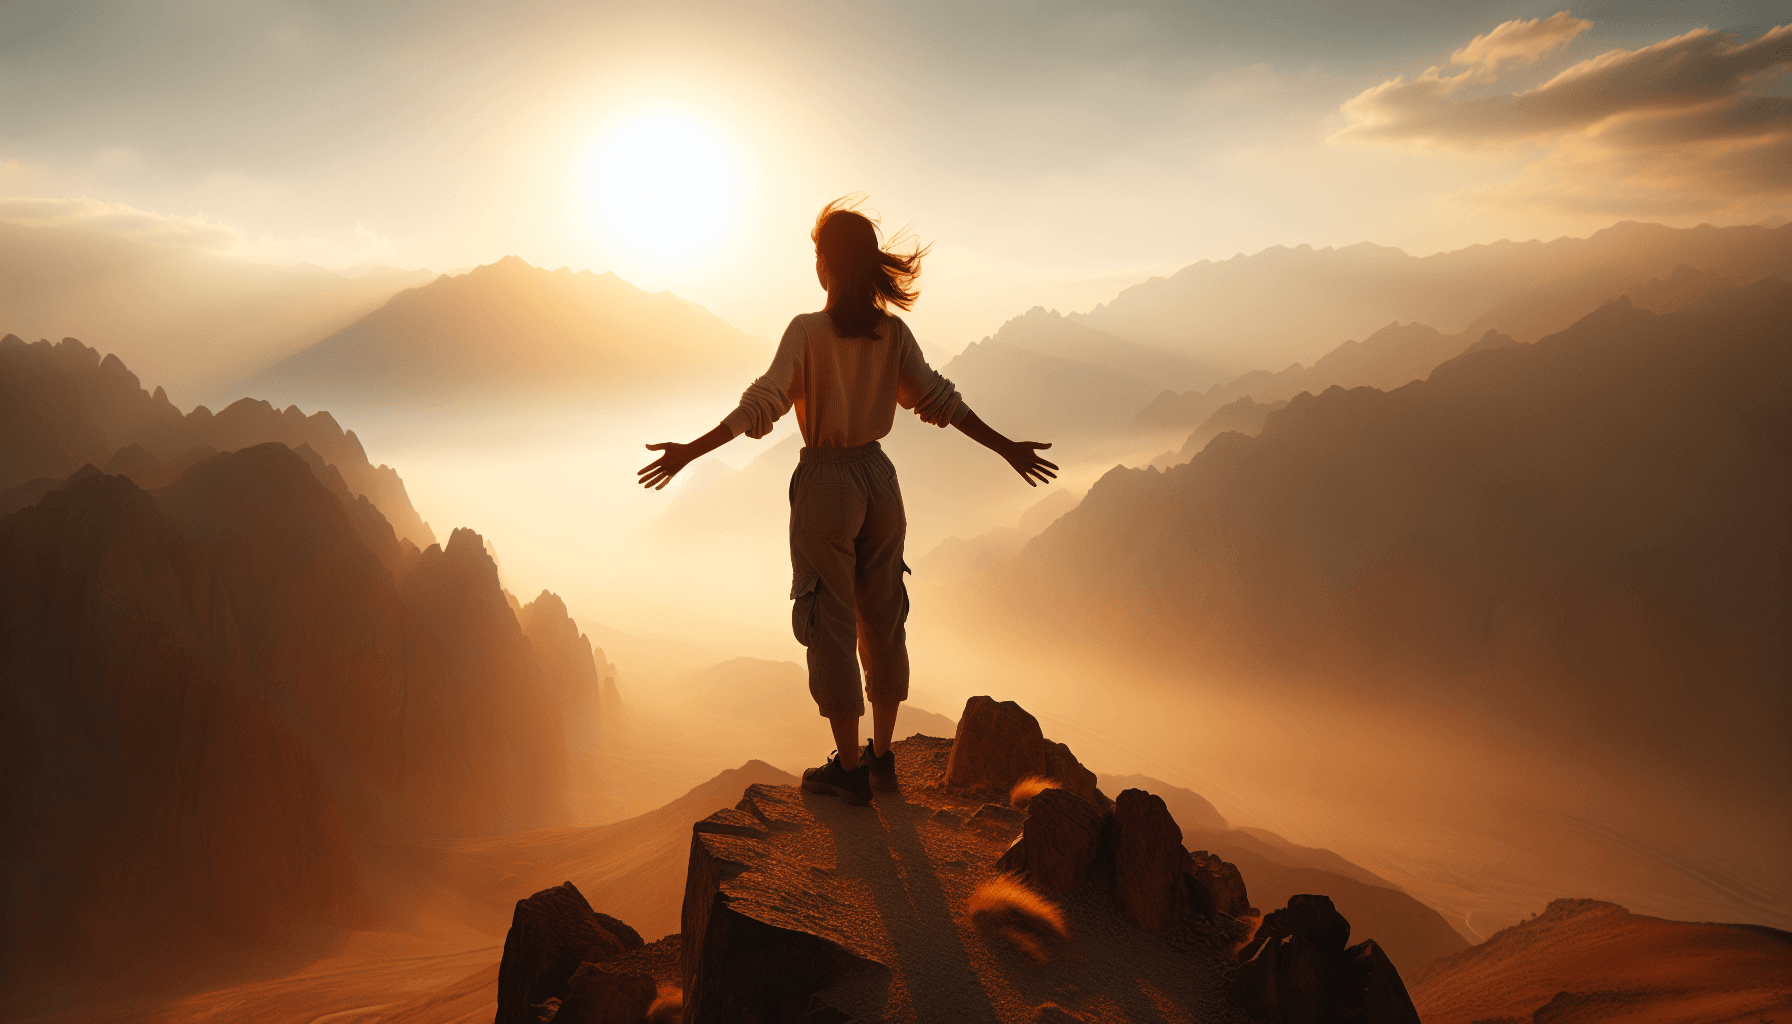 Woman embraces solitude atop misty valley at sunset